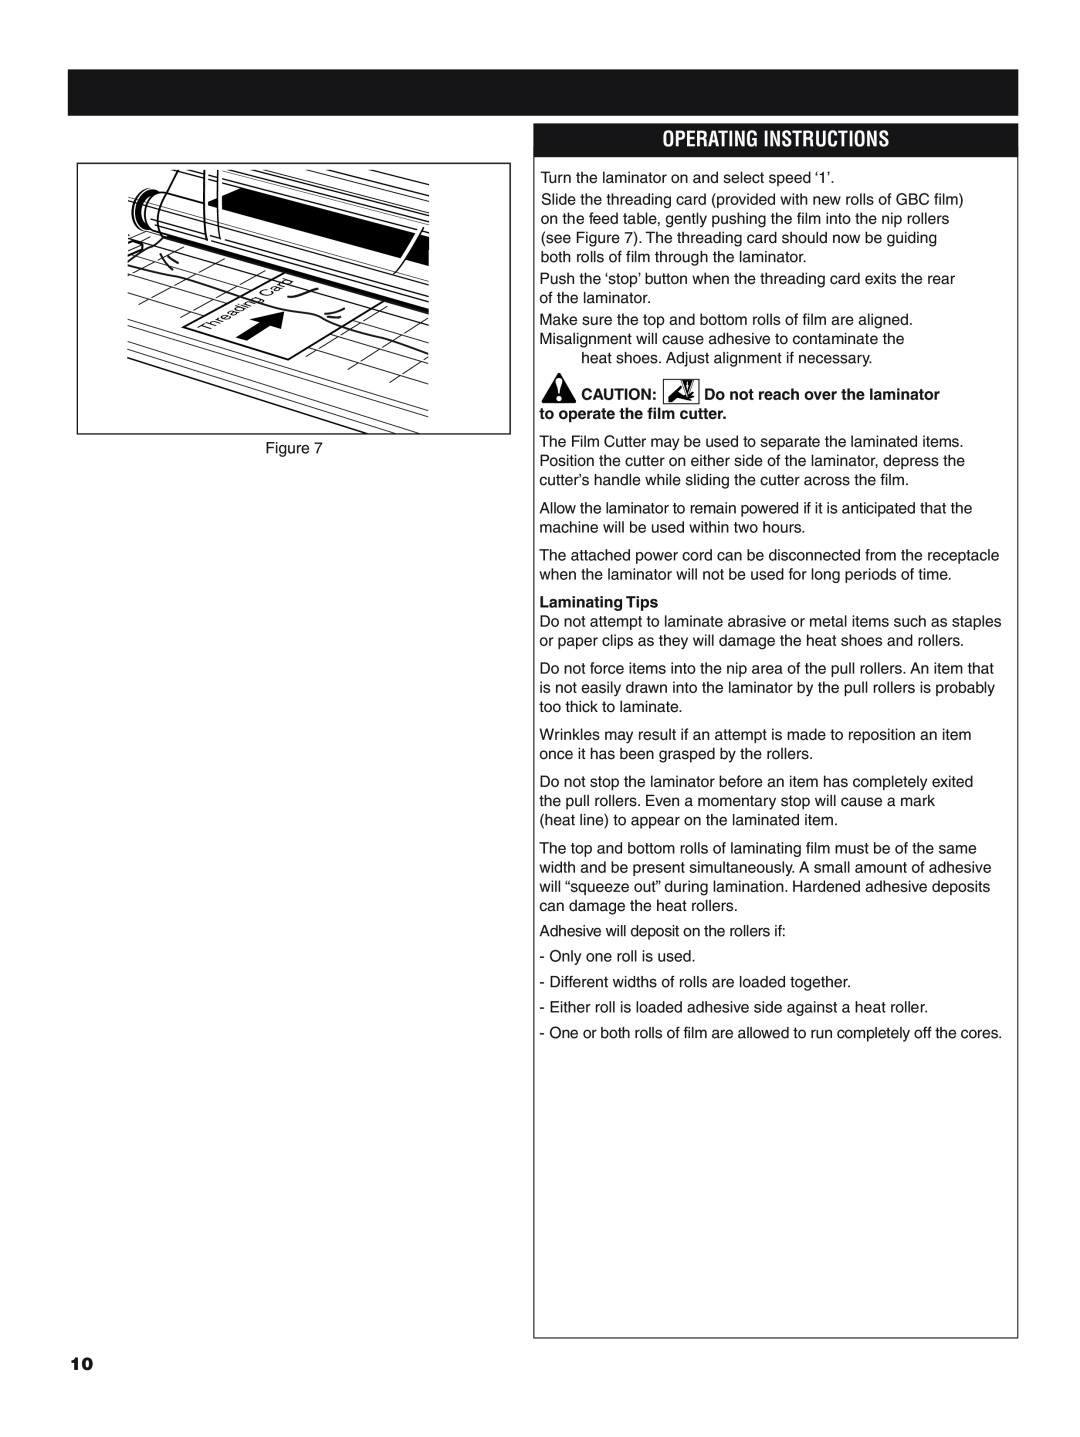 GBC H800 PRO-R manual Operating Instructions, CAUTION Do not reach over the laminator, to operate the film cutter 